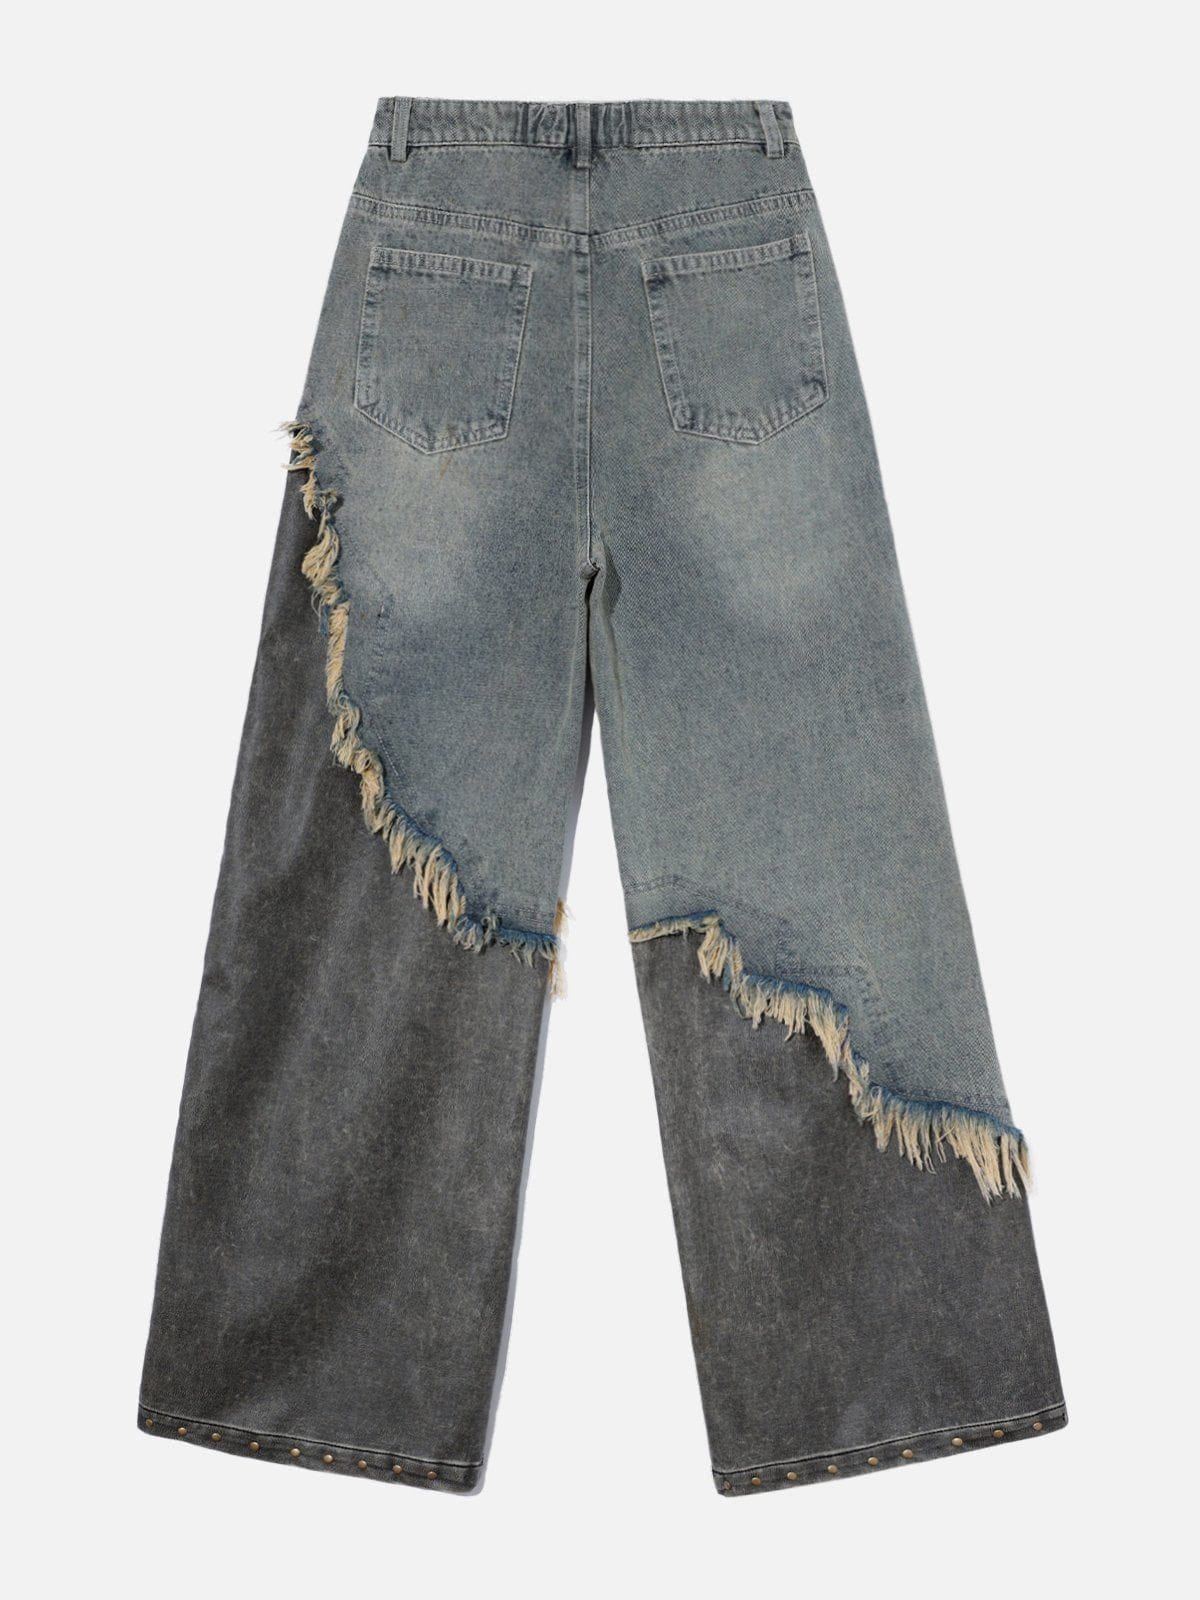 Vintage Distressed Leather Patchwork Jeans